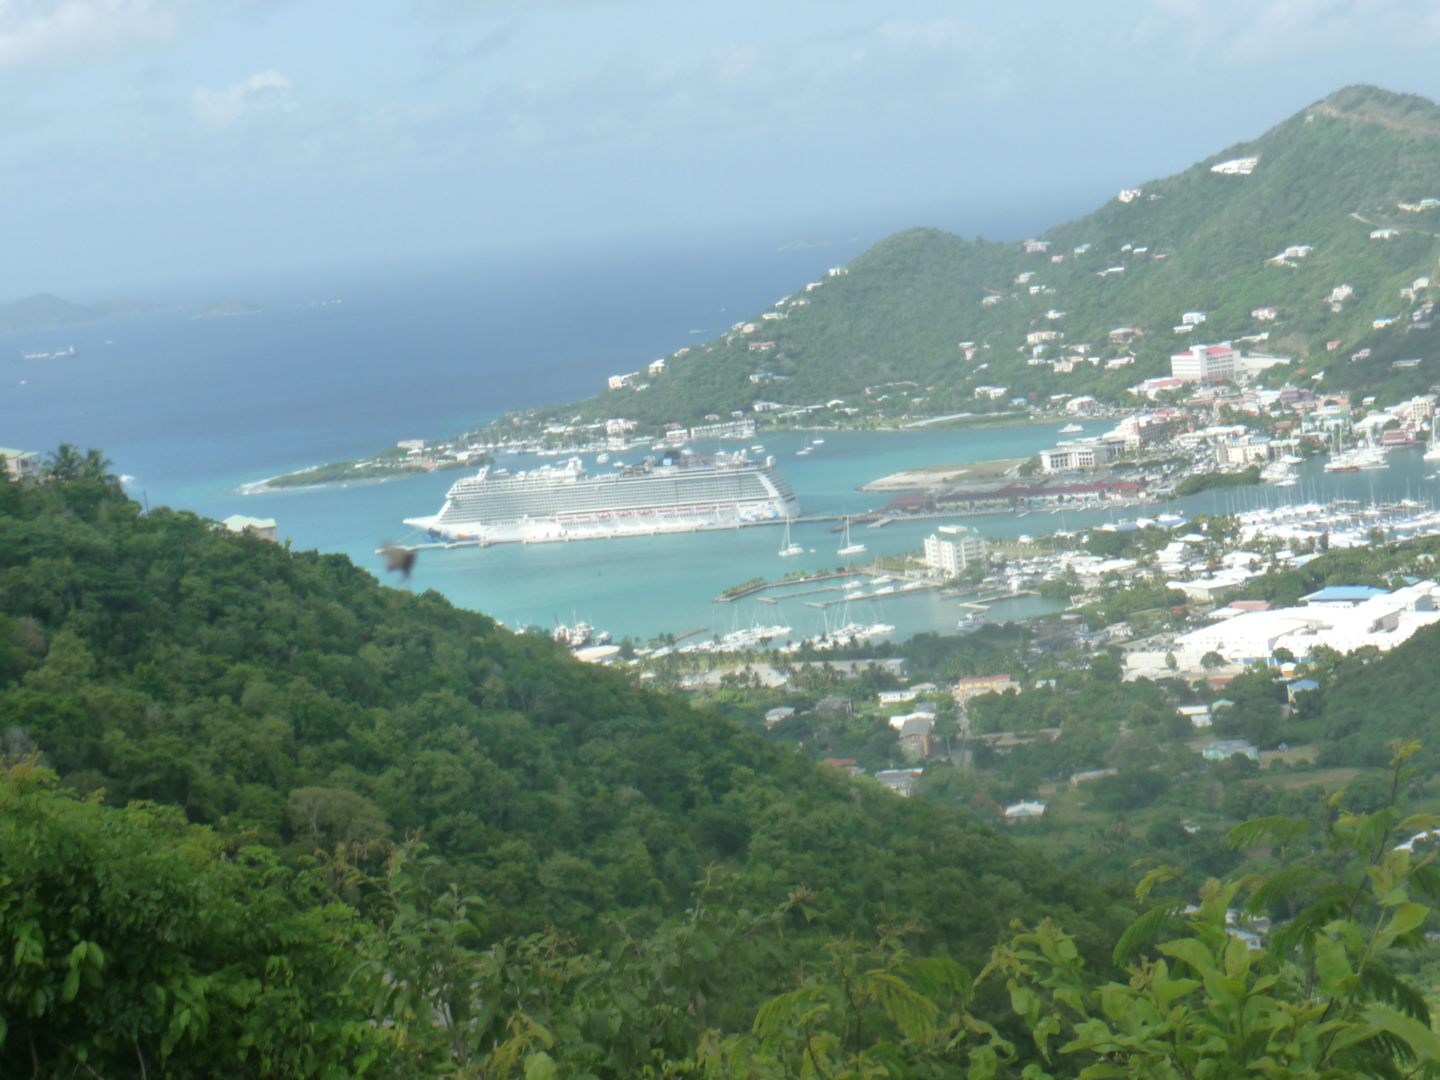 Photo of The Cruise Ship in Port, far away from the mountain top.